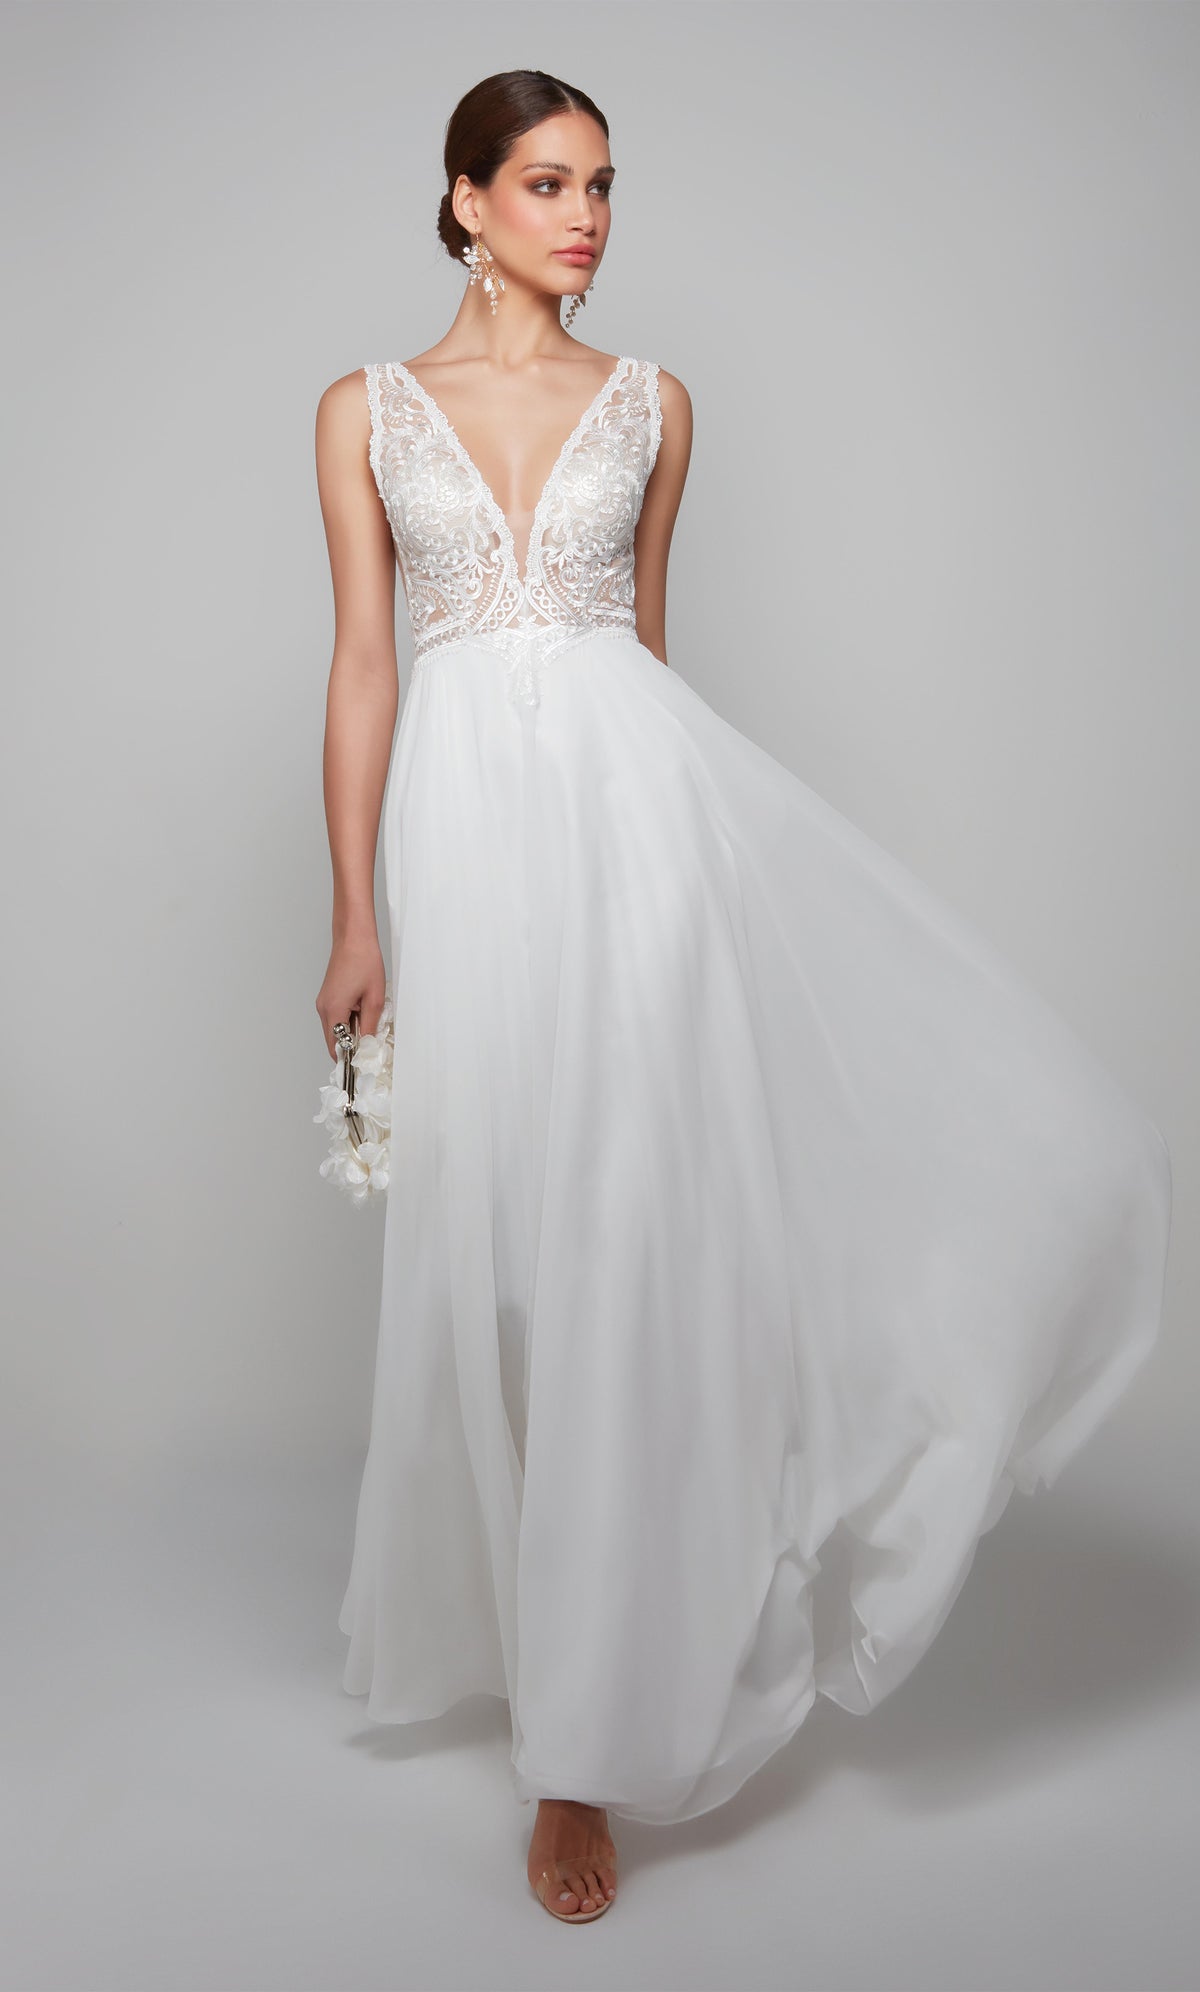 Plunging flowy chiffon wedding dress with an elegant lace bodice in white.